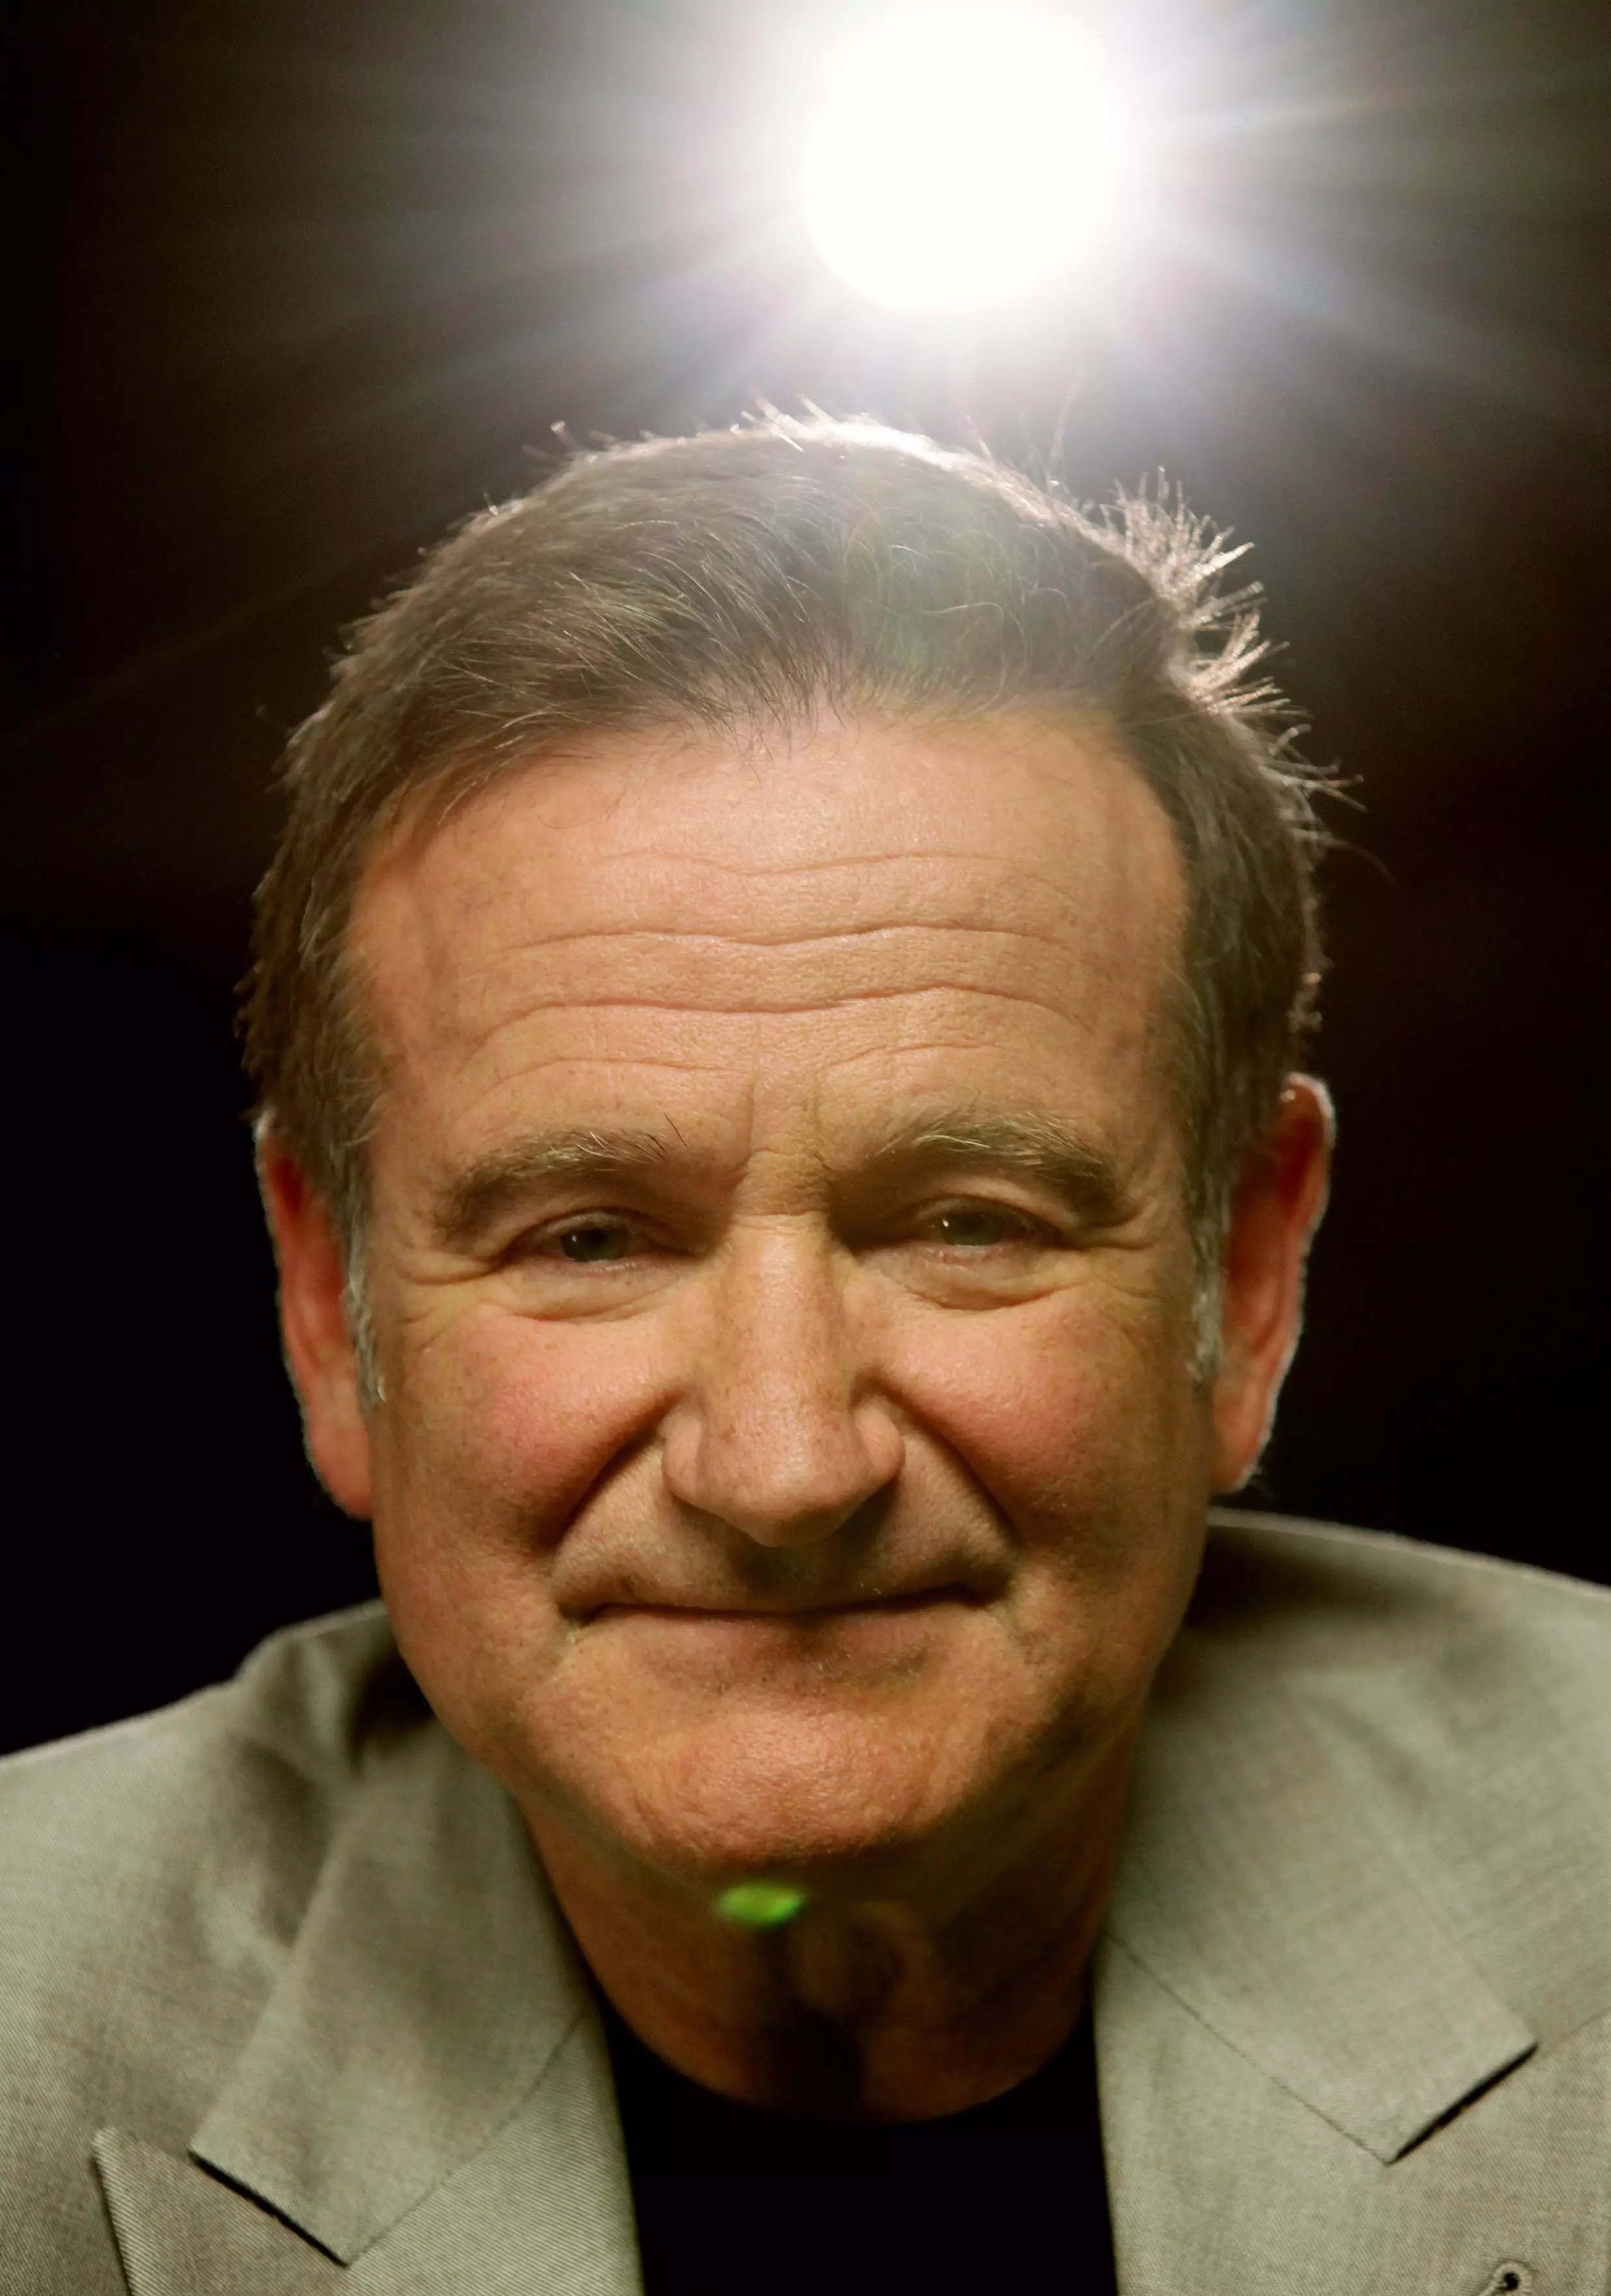 Robin Williams passed away in 2014 (